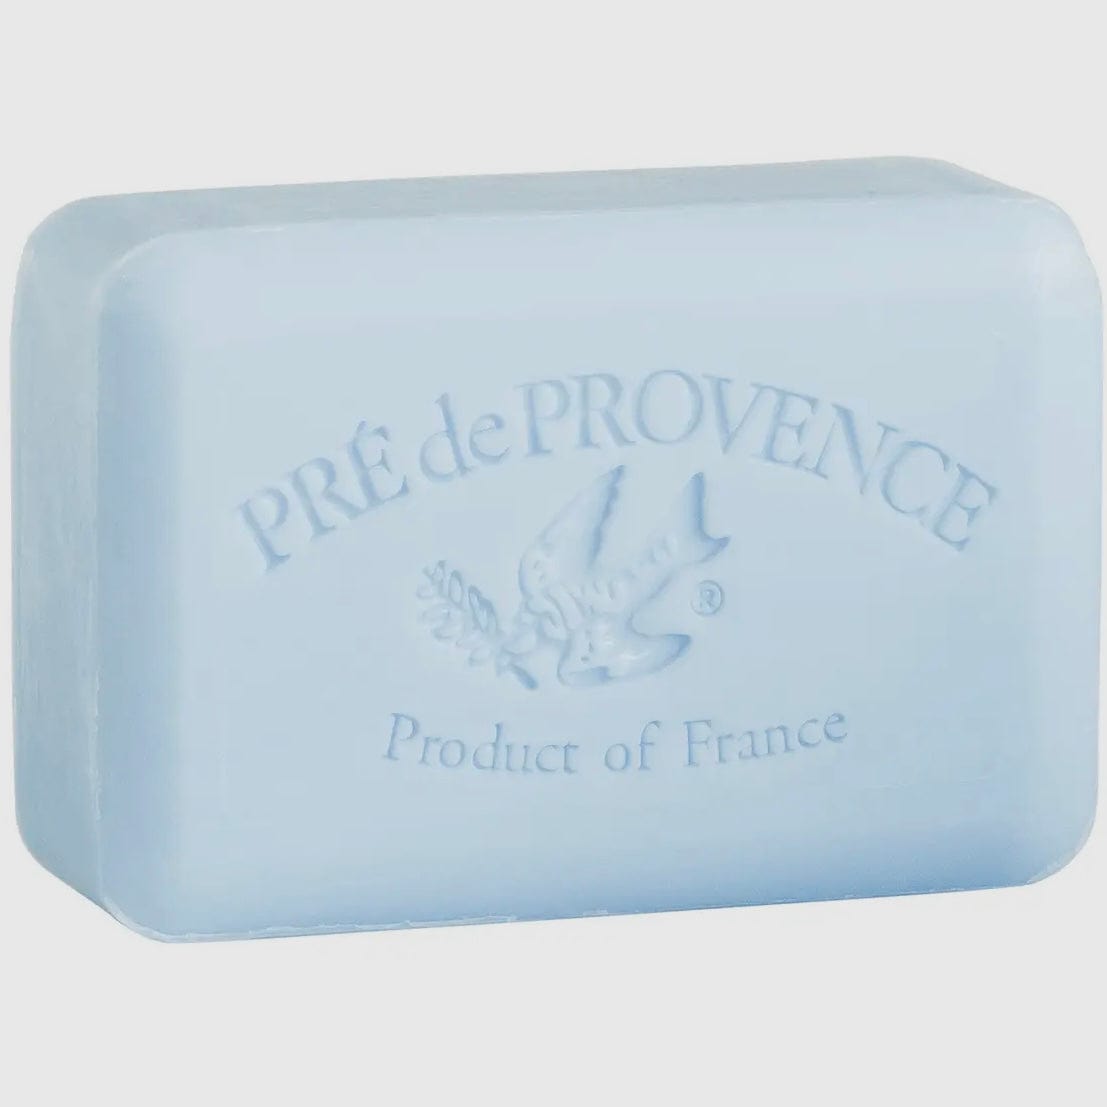 Ocean Air French Milled Soap - 250g - PORCH